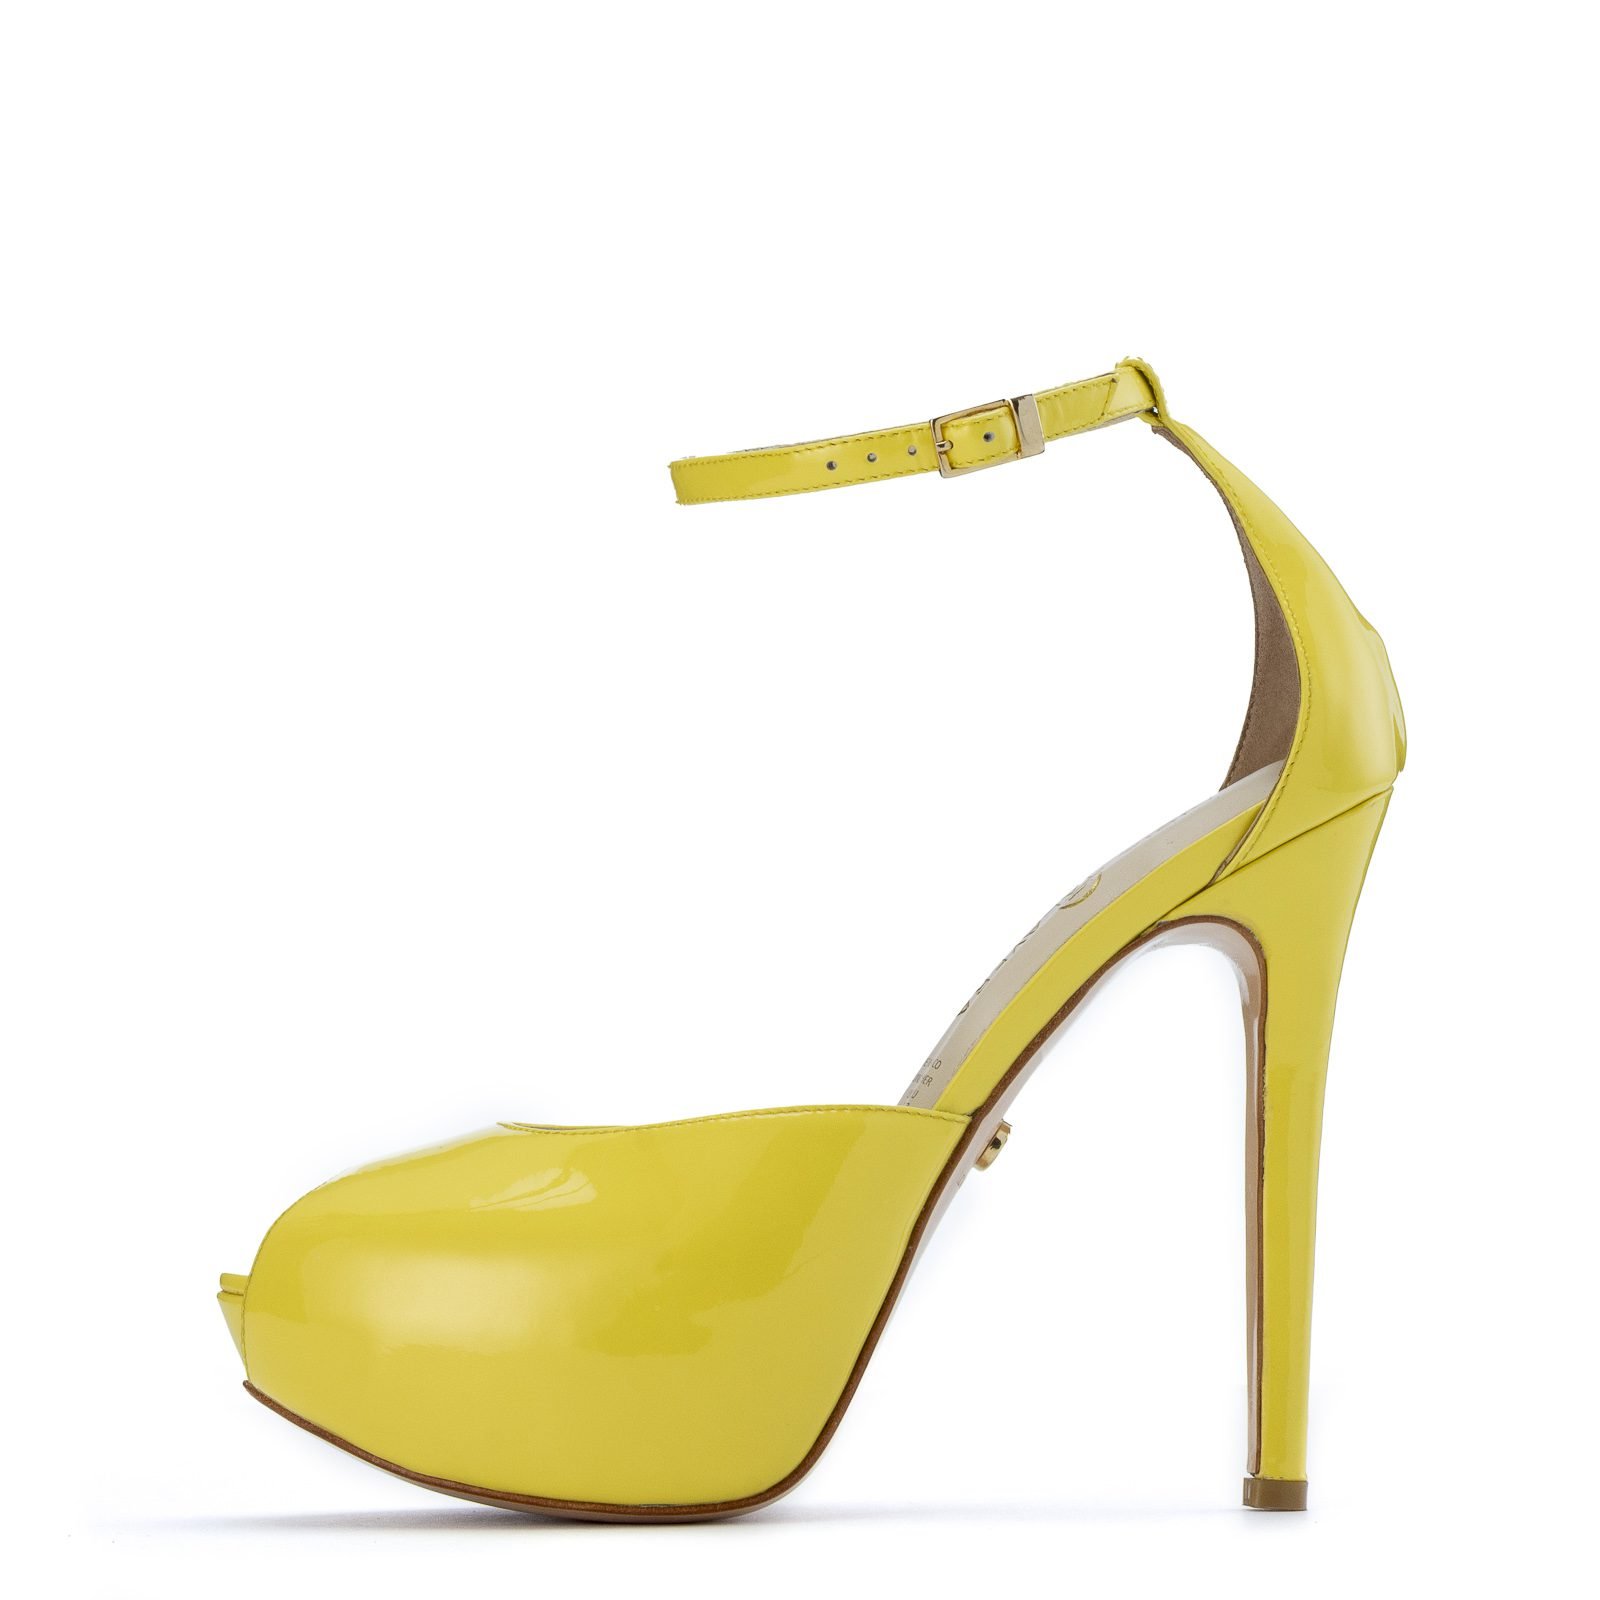 wide yellow pumps for wide feet